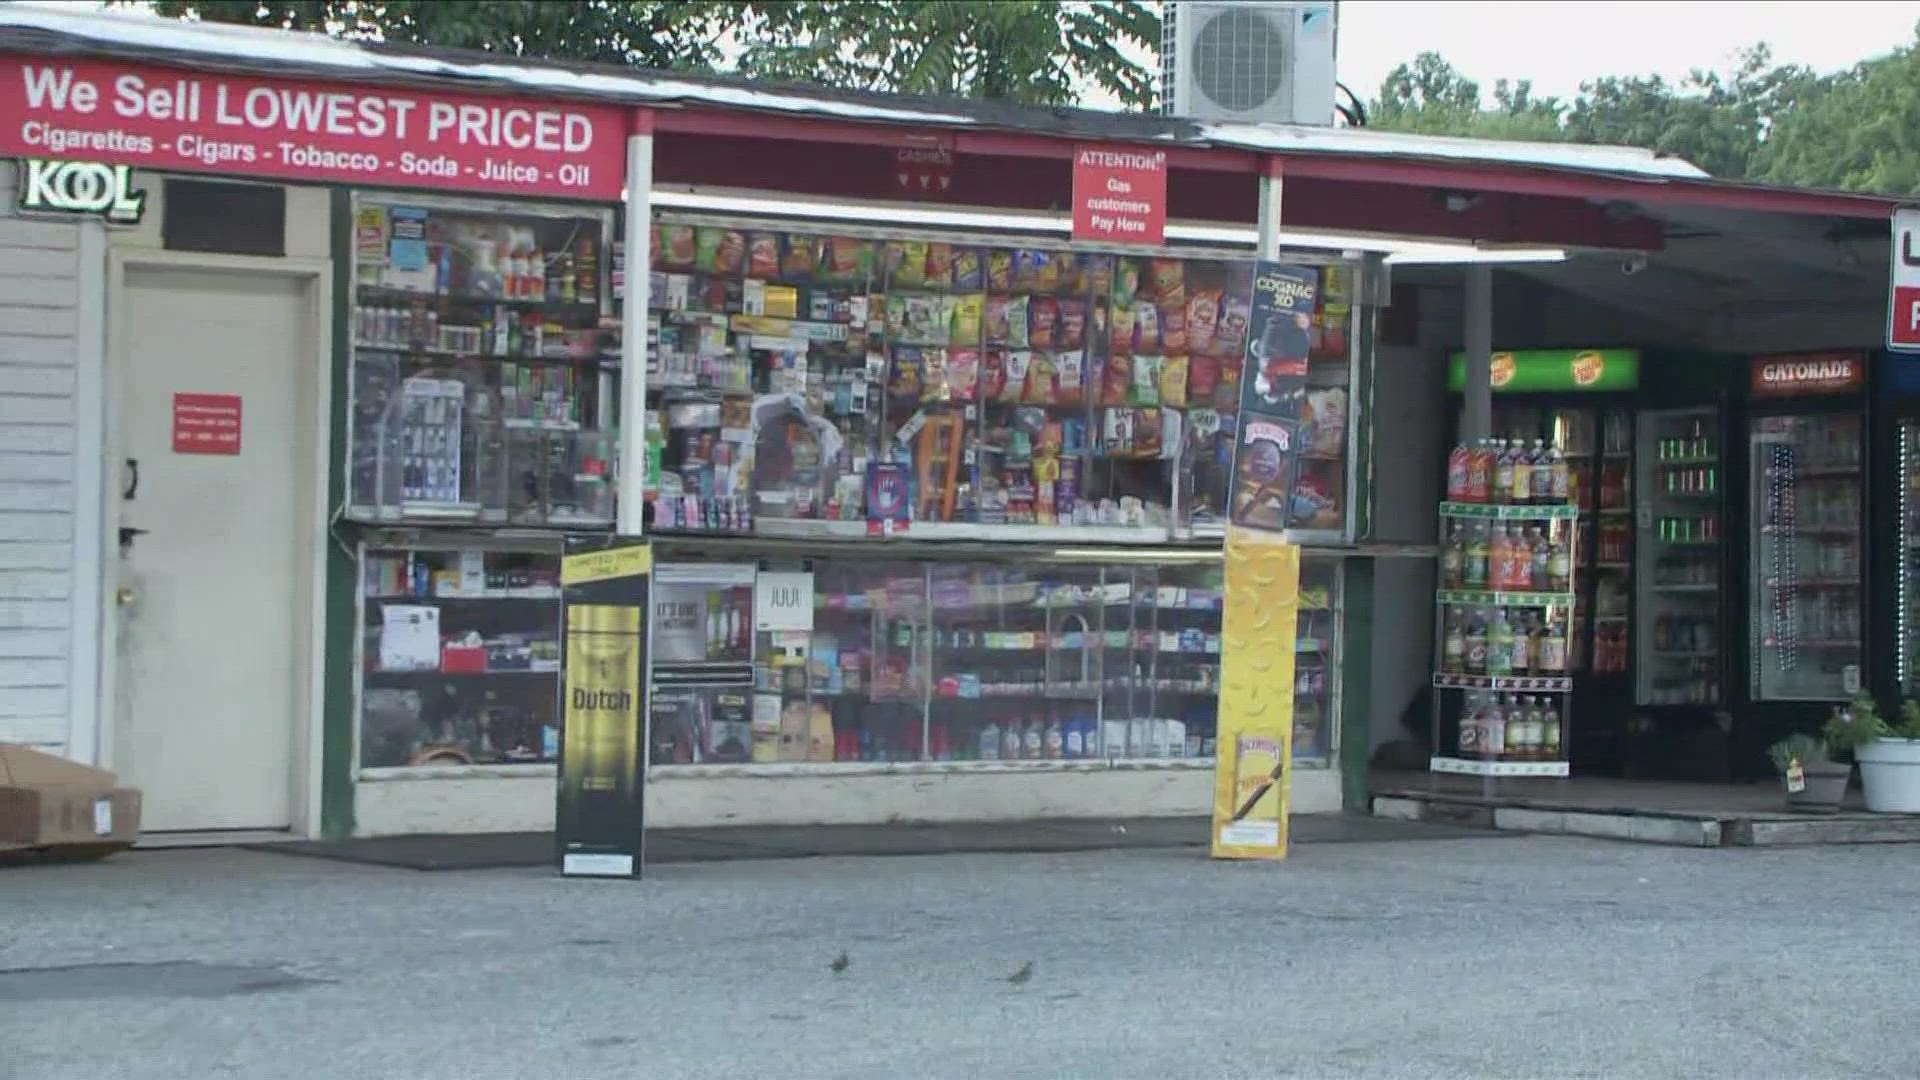 A 15 and 12-year-old boy were arrested and charged with murder for allegedly stabbing a gas station employee to death during an attempted robbery in Clinton, MD.